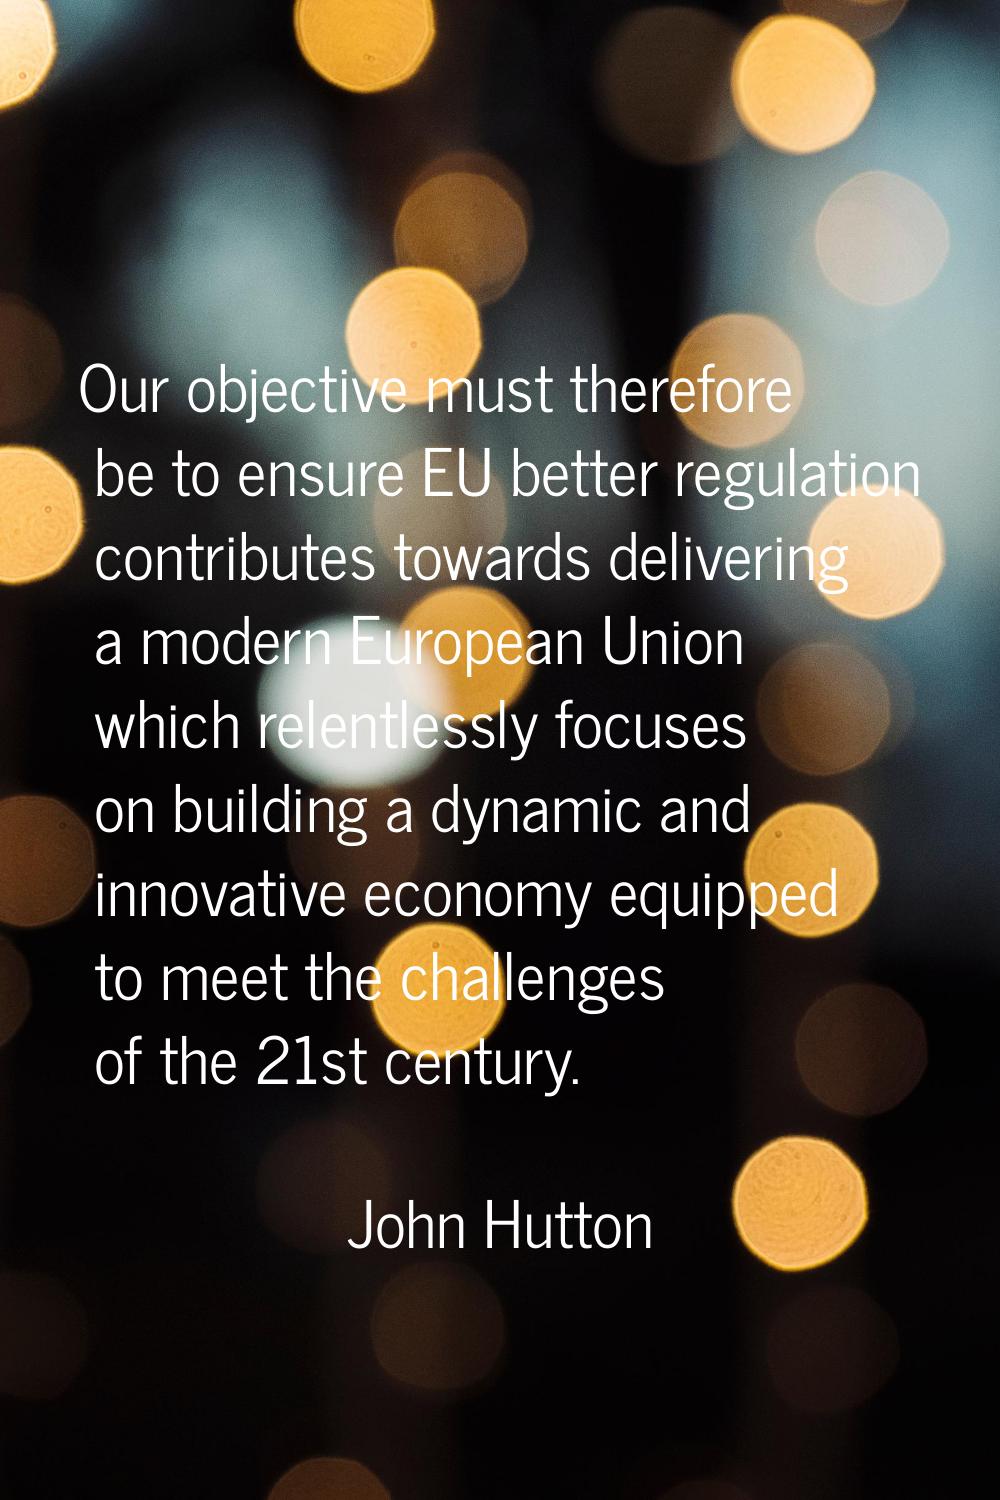 Our objective must therefore be to ensure EU better regulation contributes towards delivering a mod